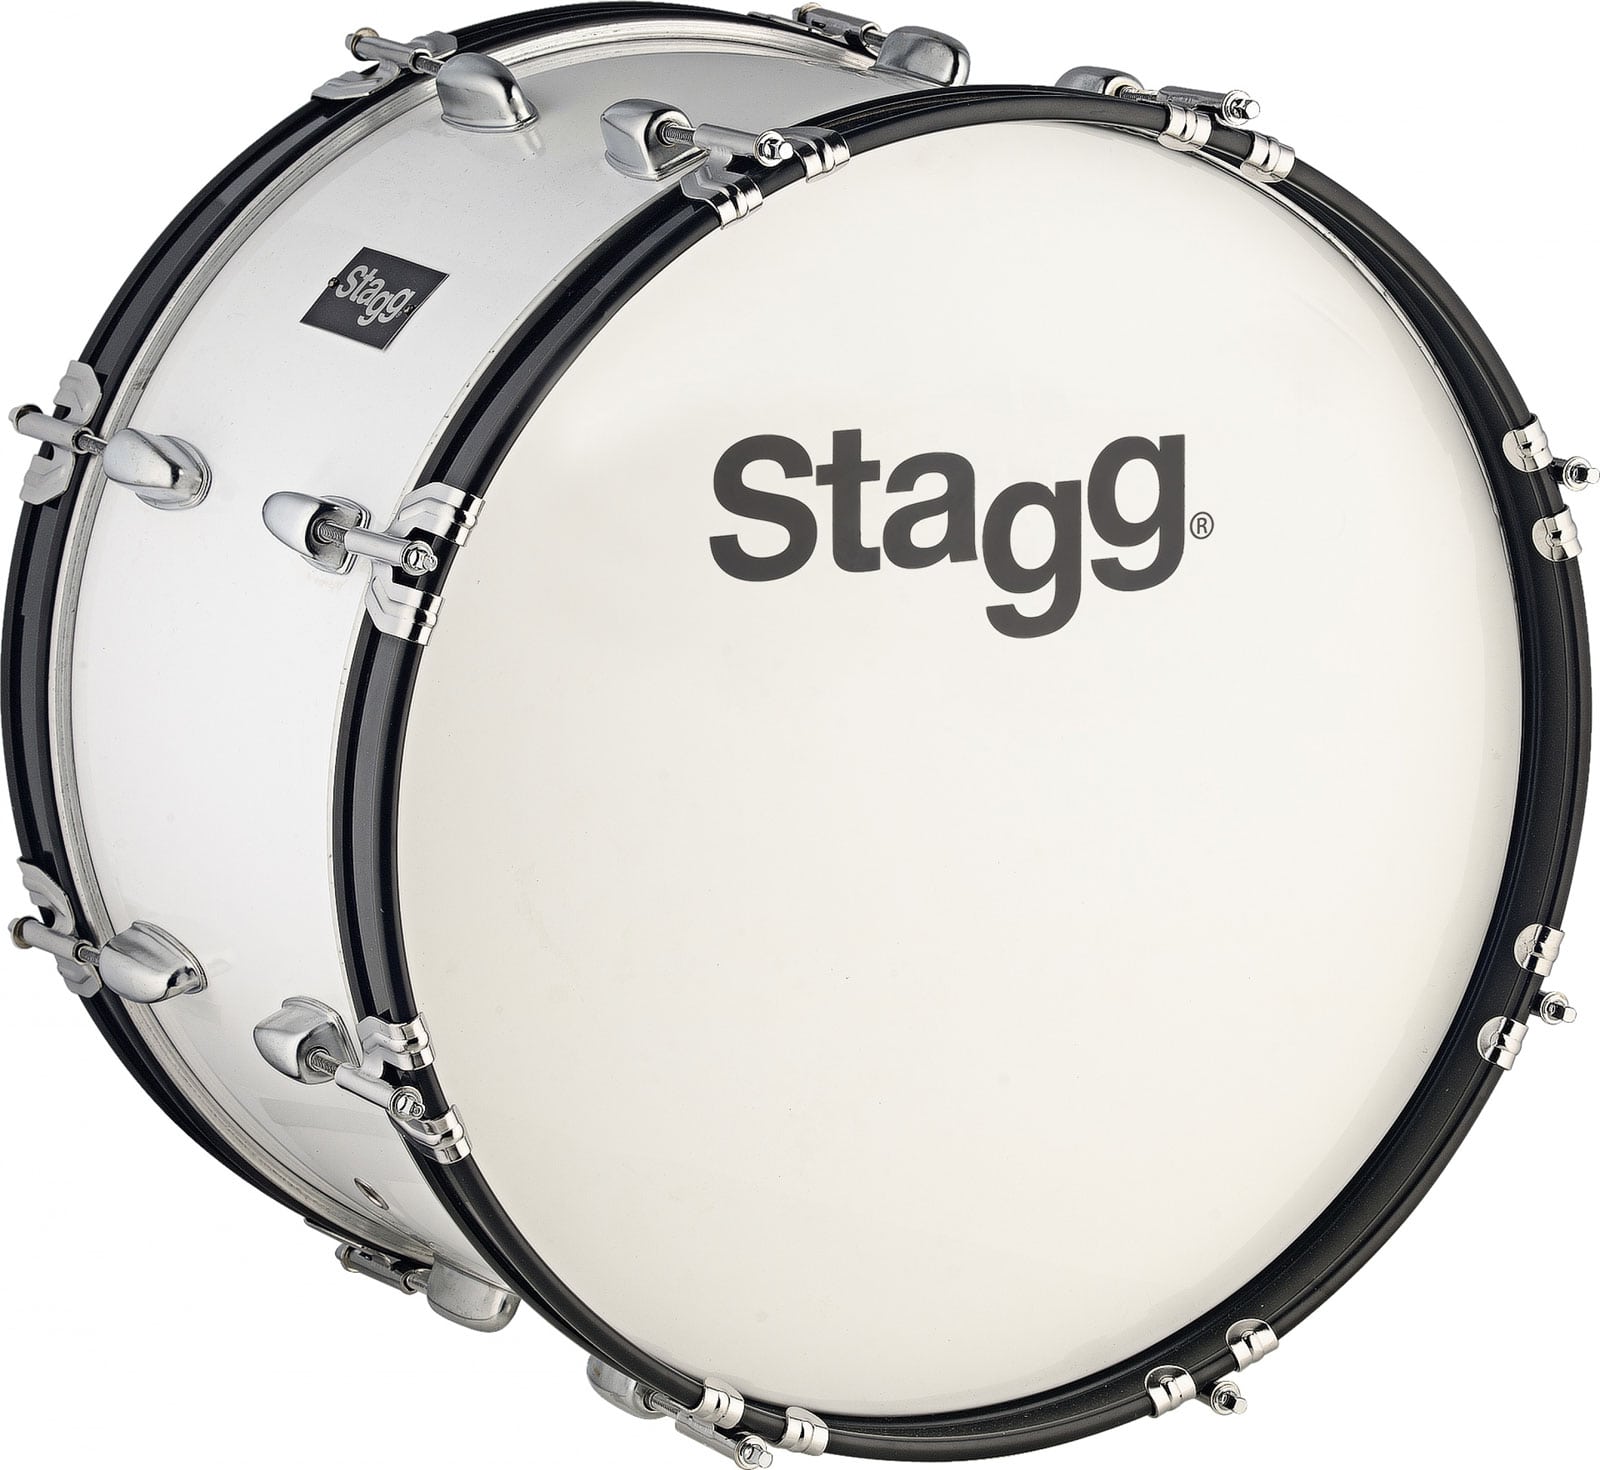 Stagg Mabd-2610 - 26 X 10 